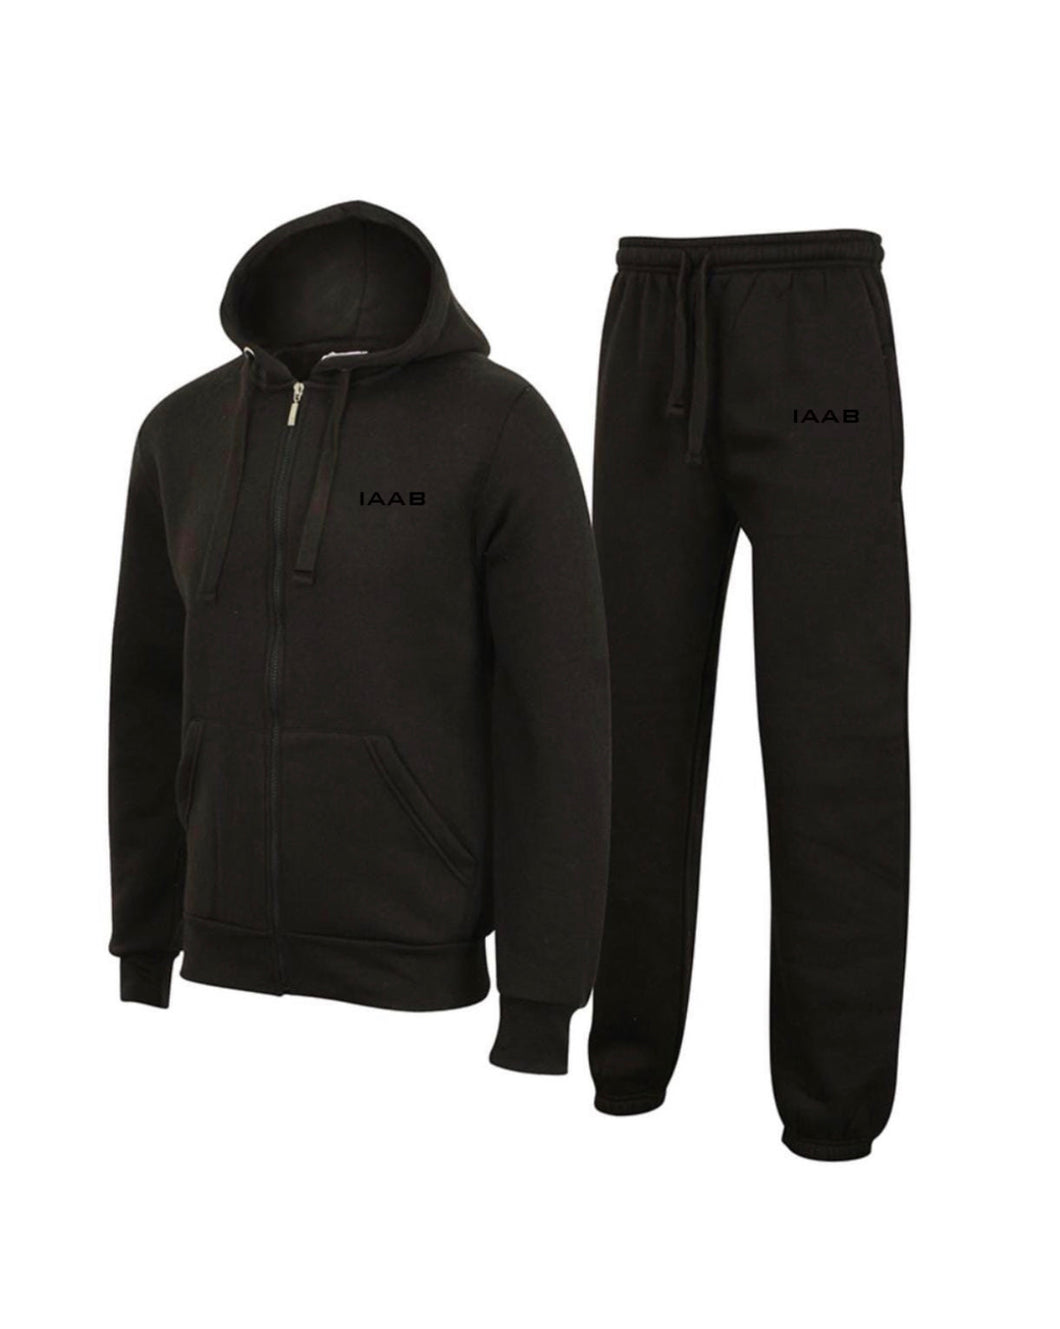 IAAB ALL-BLACK MENS TRACKSUIT WITH ZIP